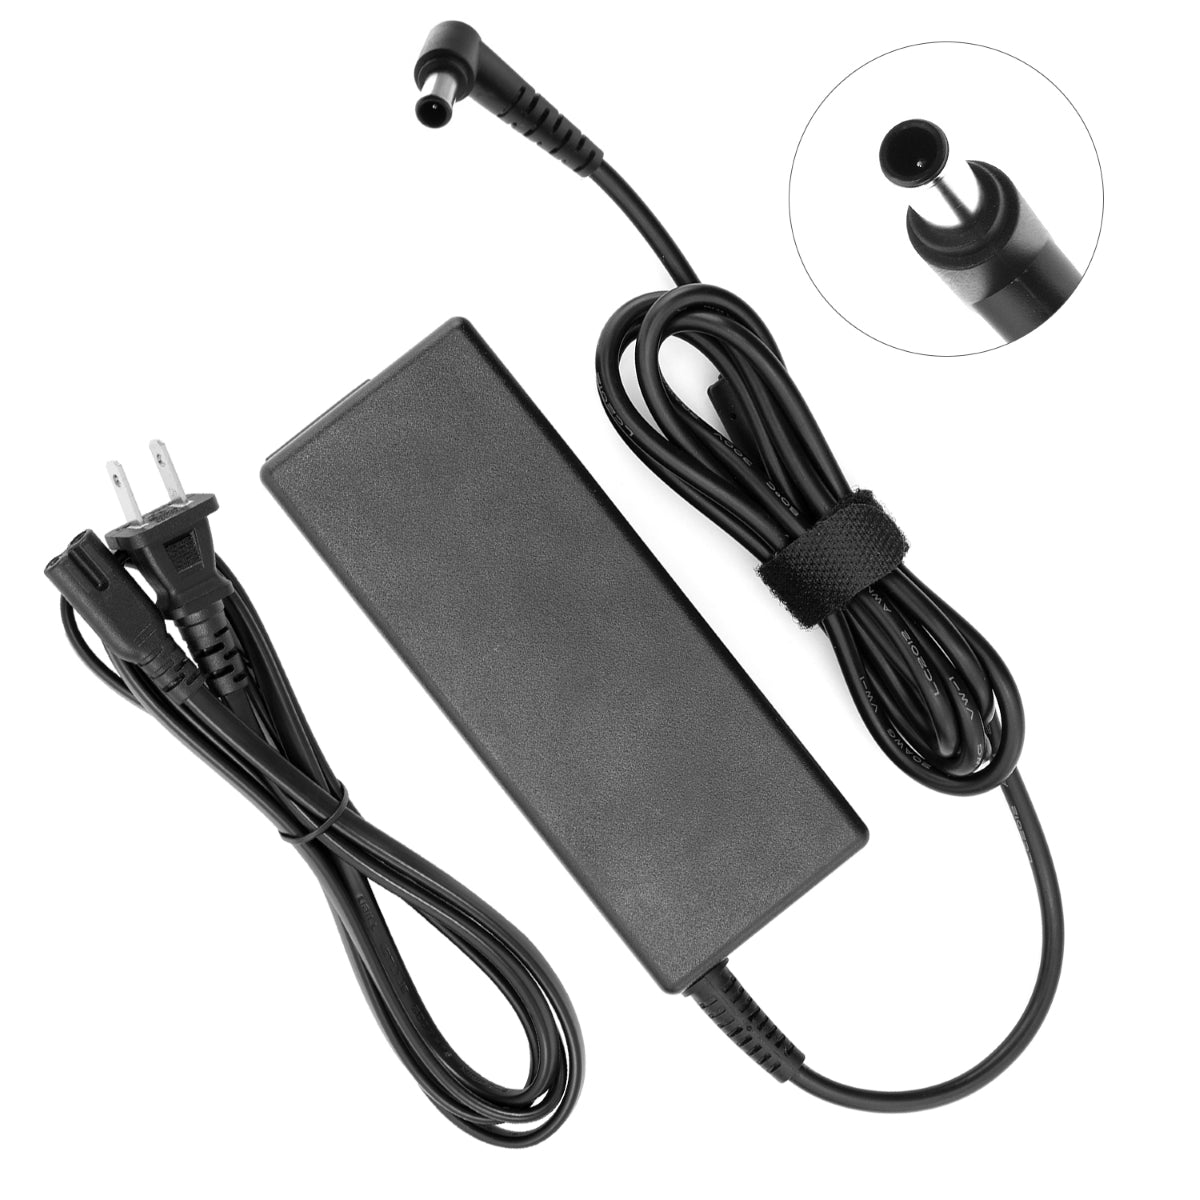 Power Adapter for LG 24QP500-B Monitor TV